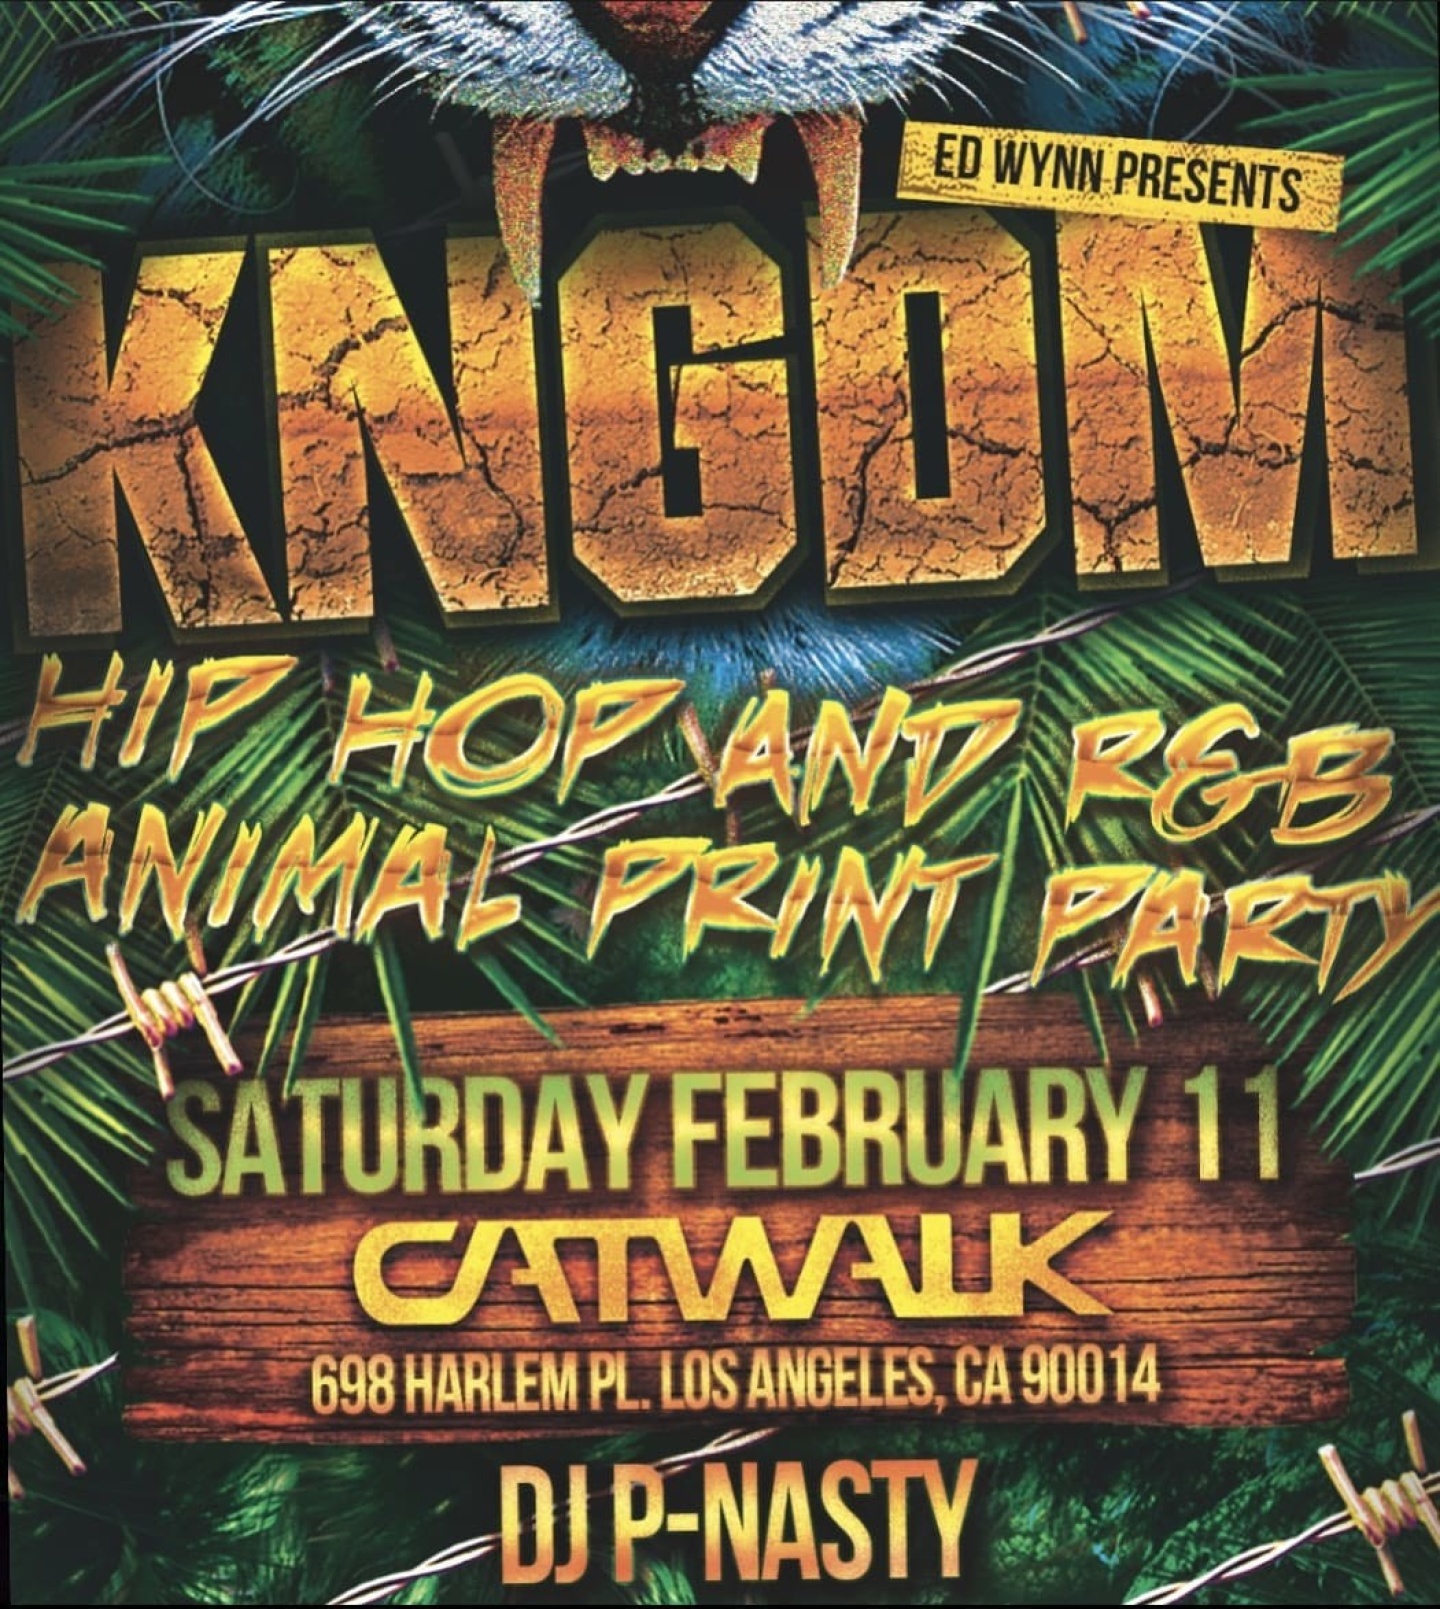 KNGDM: HIP HOP AND R&B ANIMAL PRINT PARTY